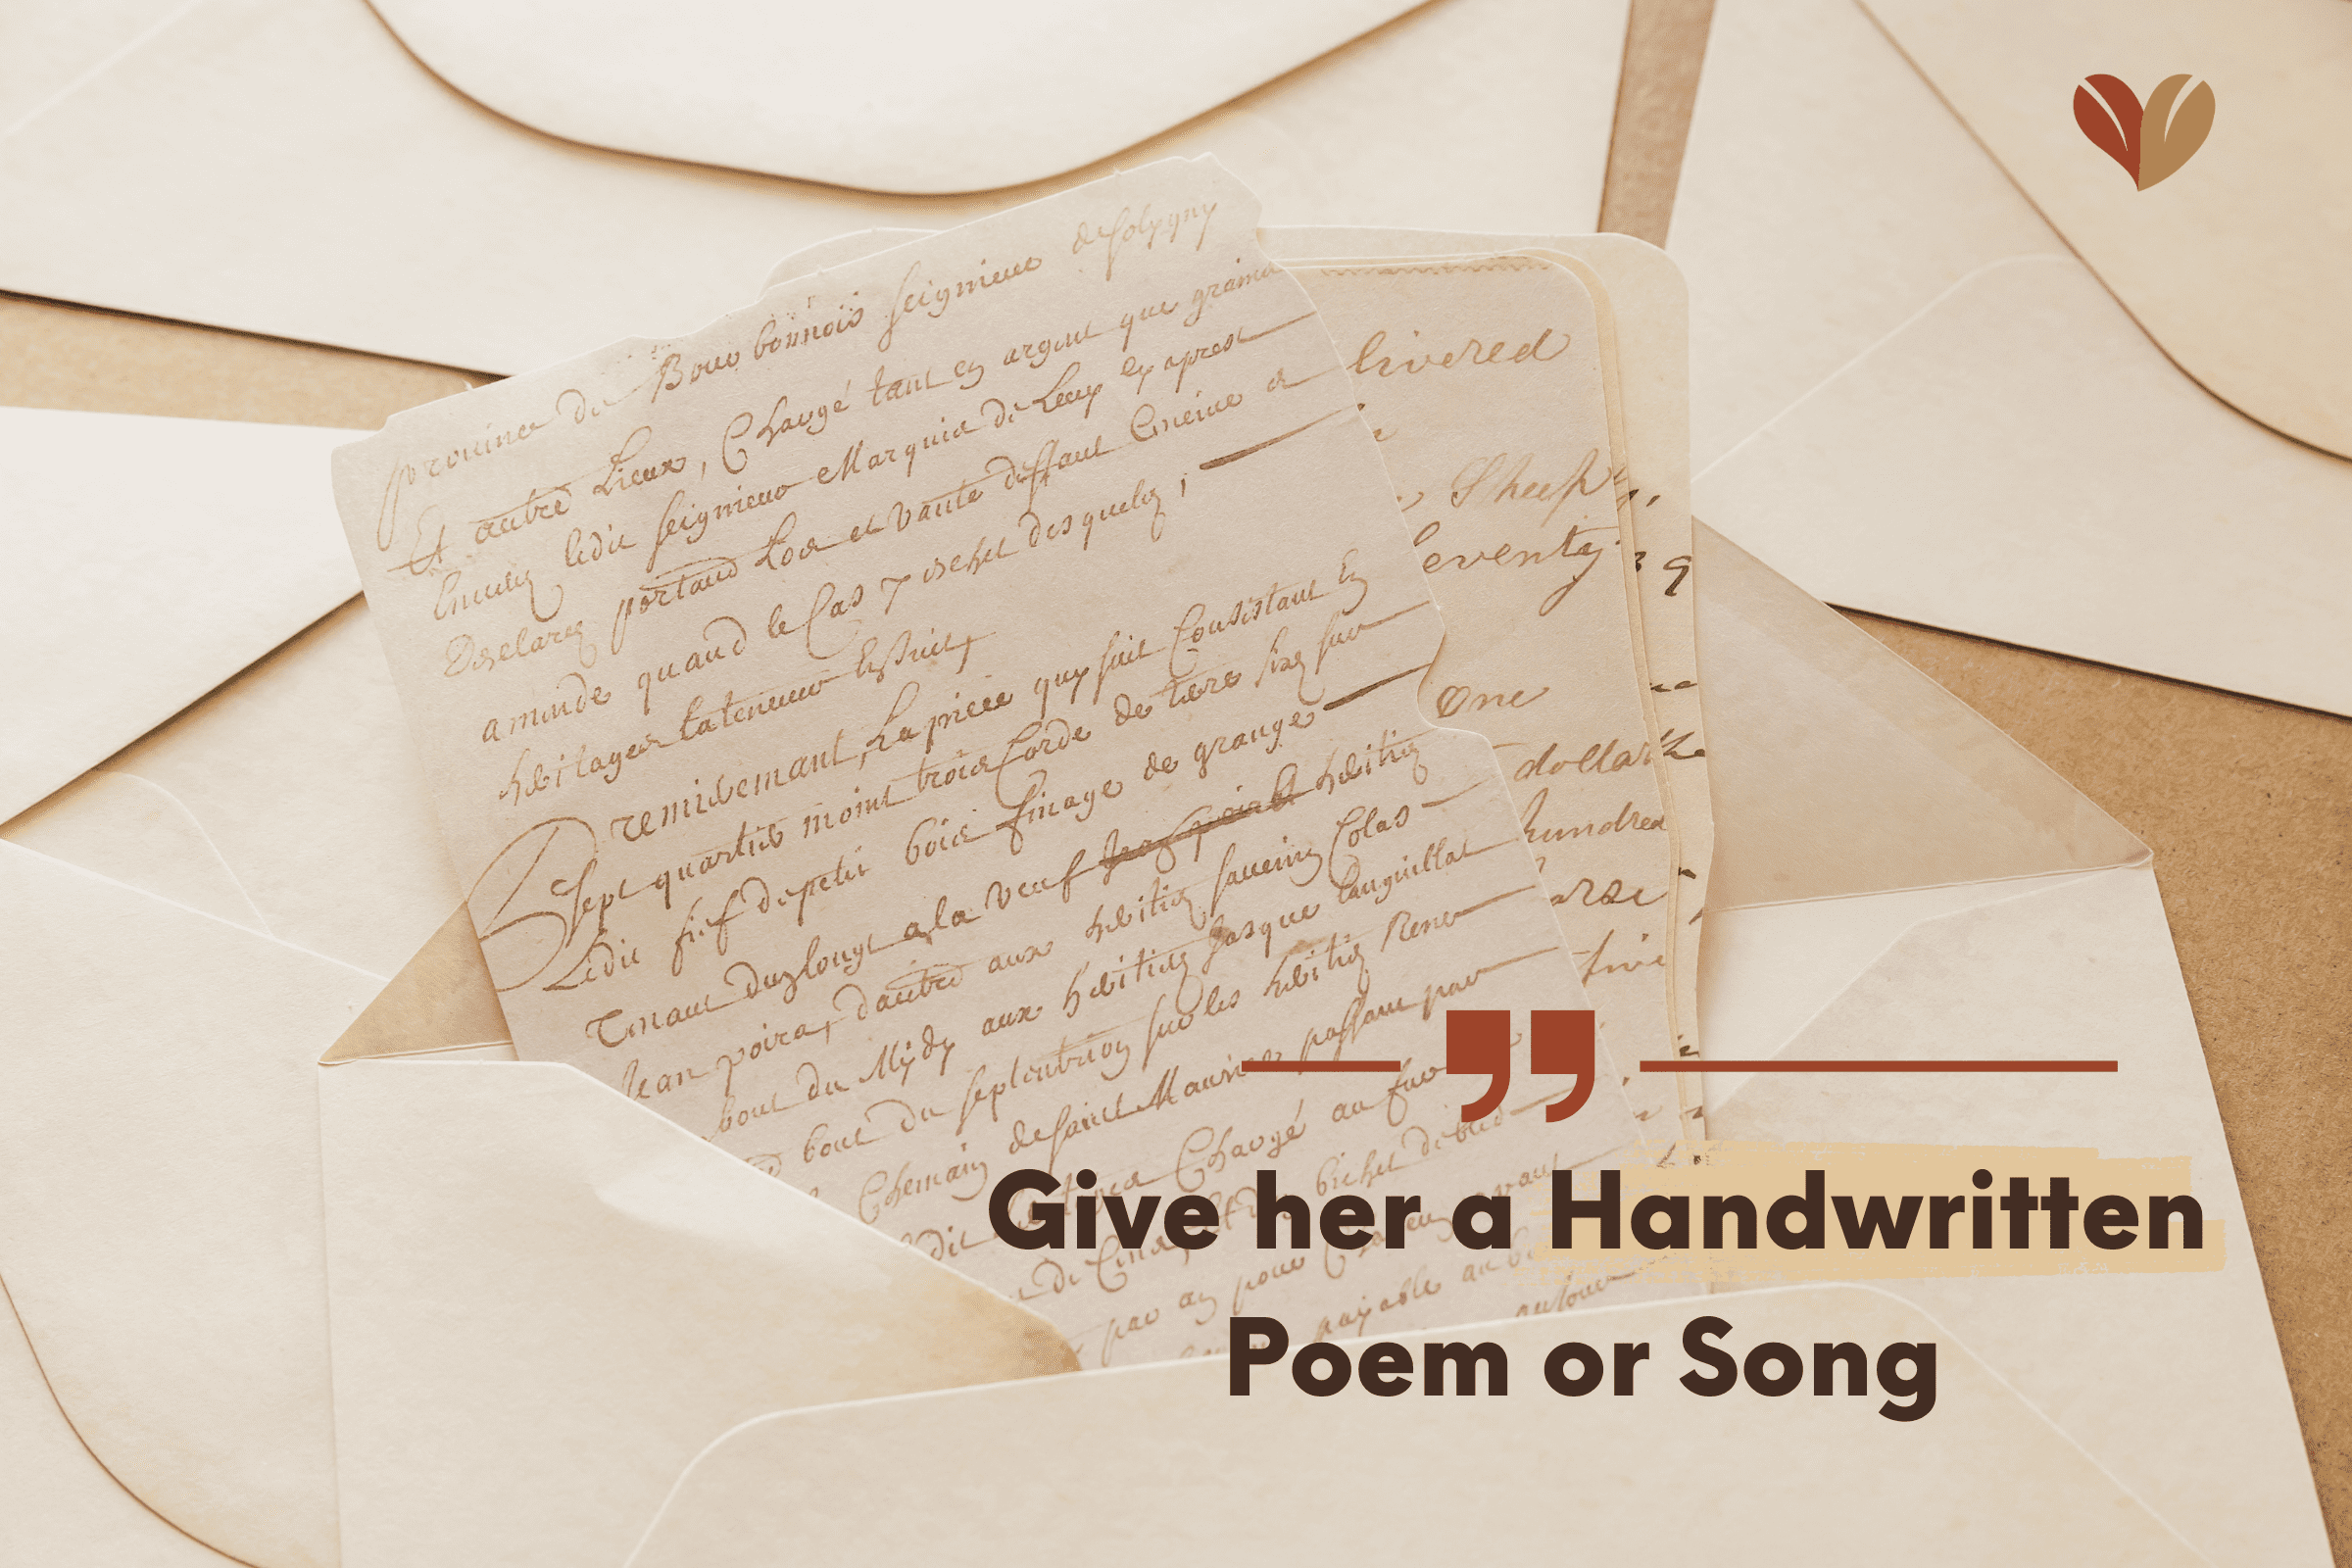 Give her a Handwritten Poem or Song